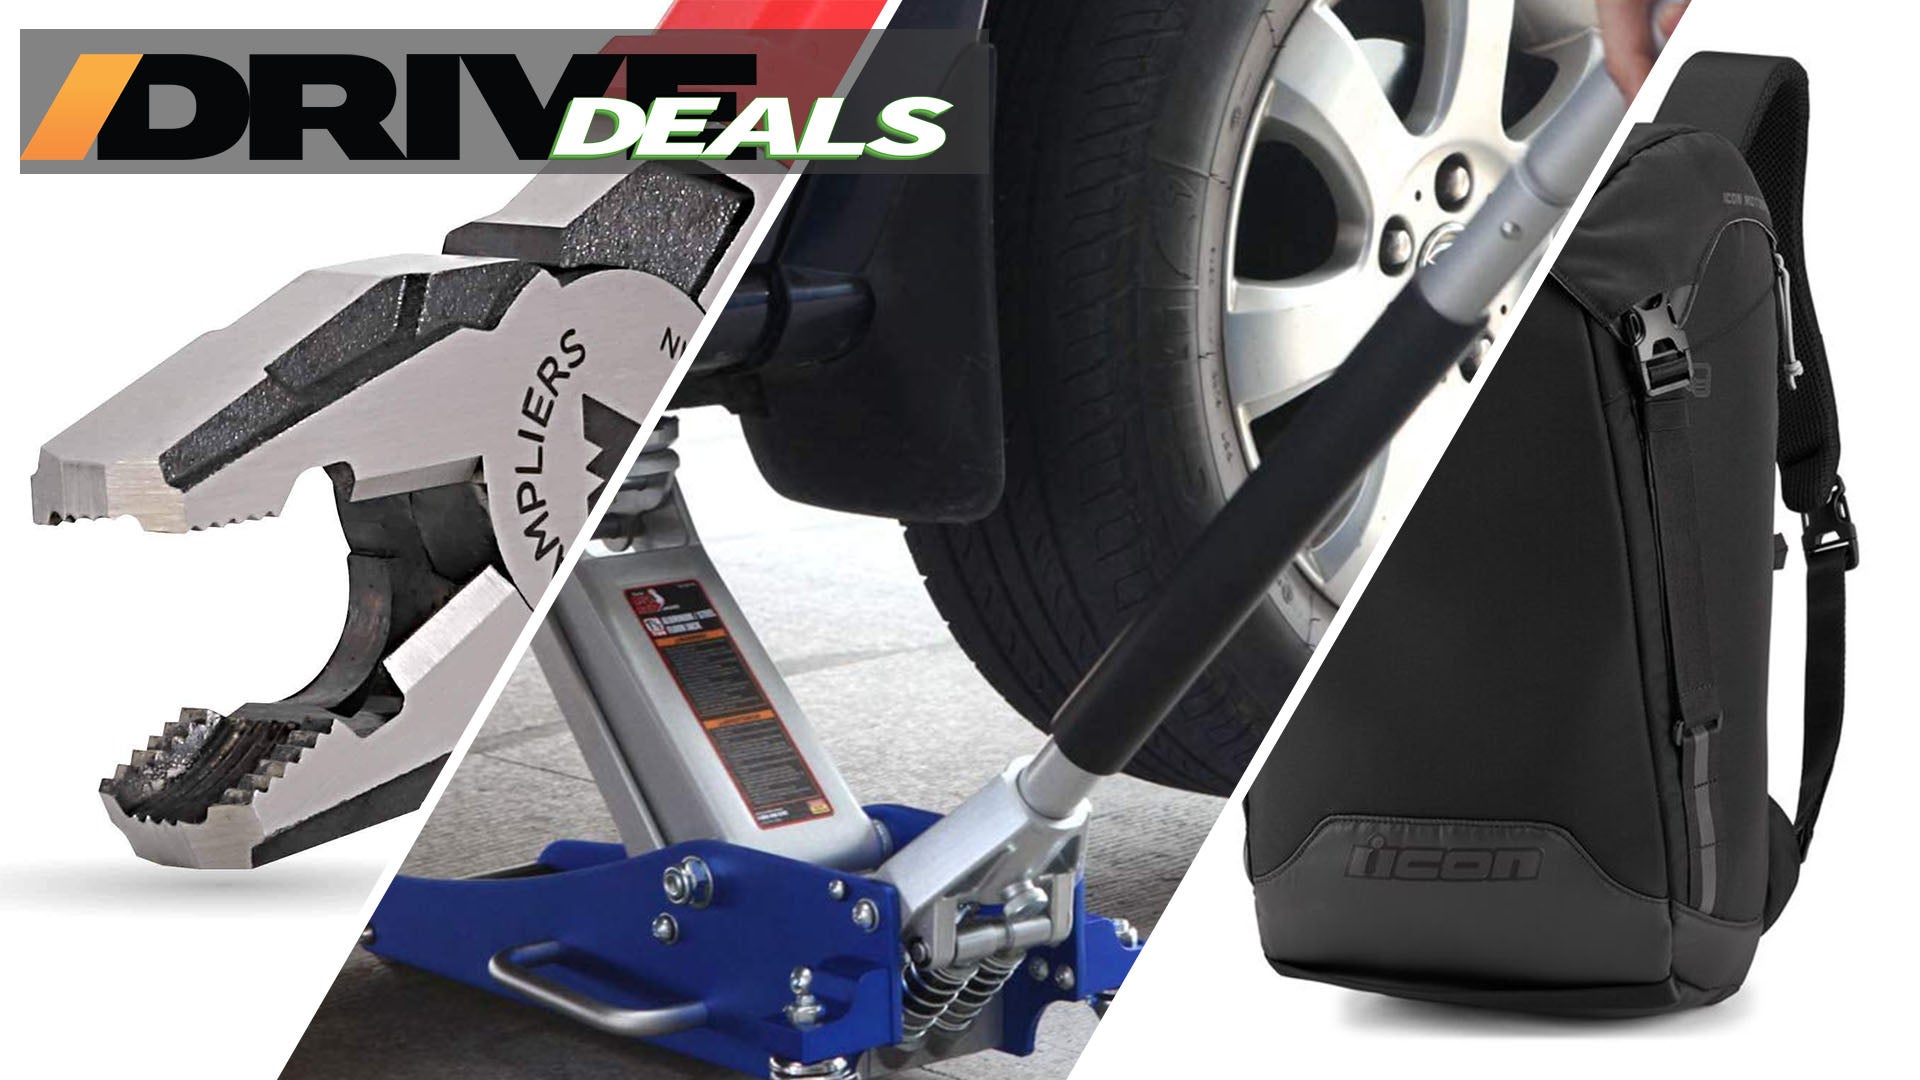 Save 45 Percent on Vampliers and Grab More Shop Essentials